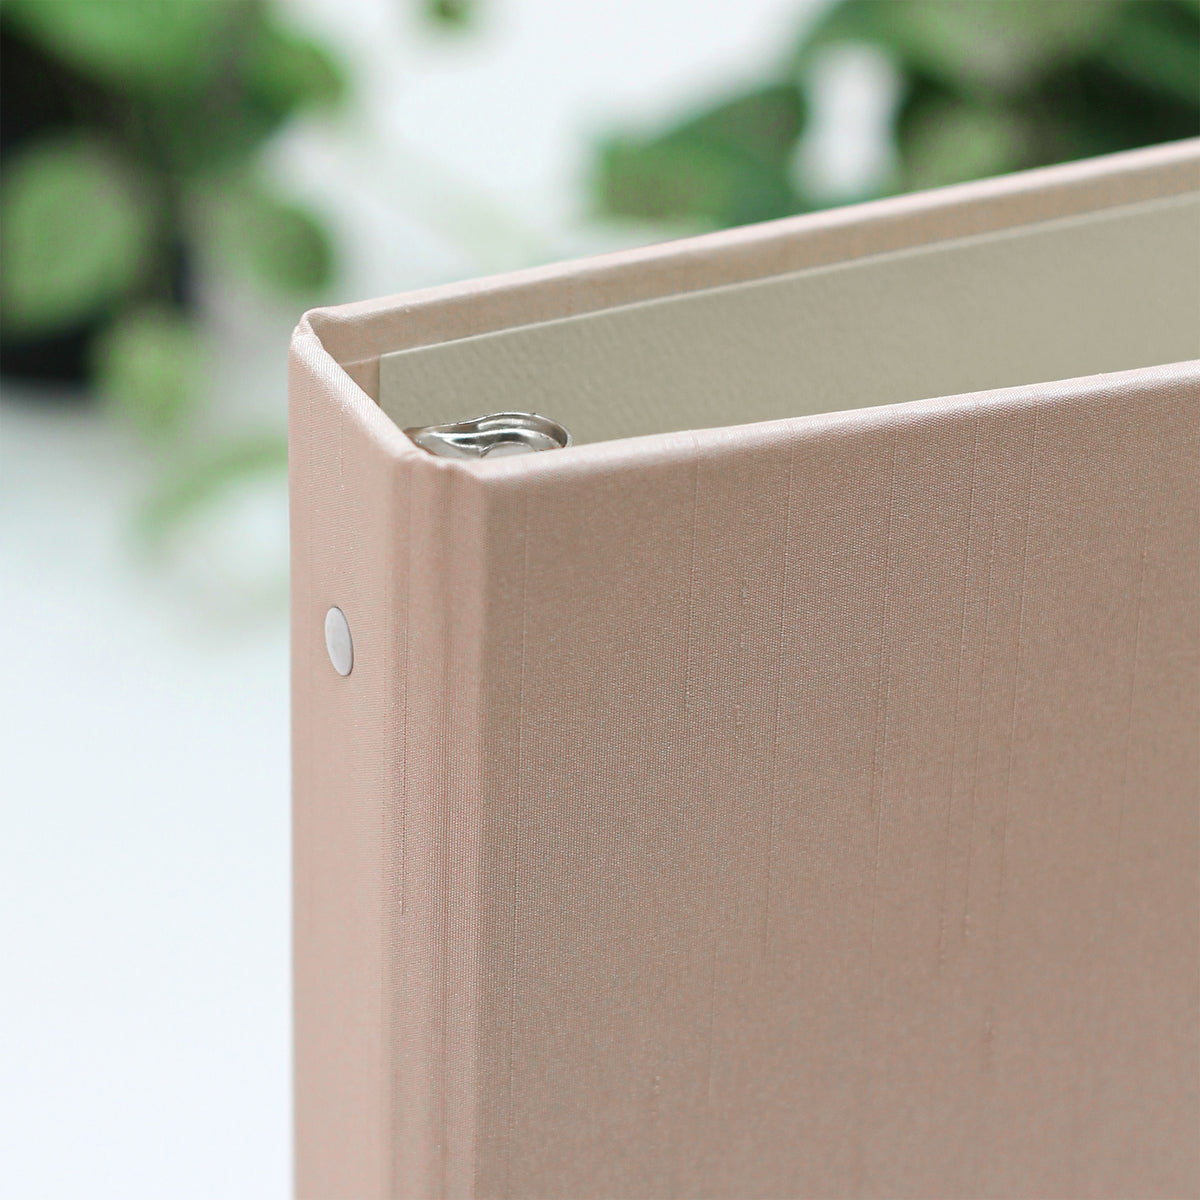 Large Photo Binder For 5x7 Photos | Cover: Blush Pink Silk | Available Personalized